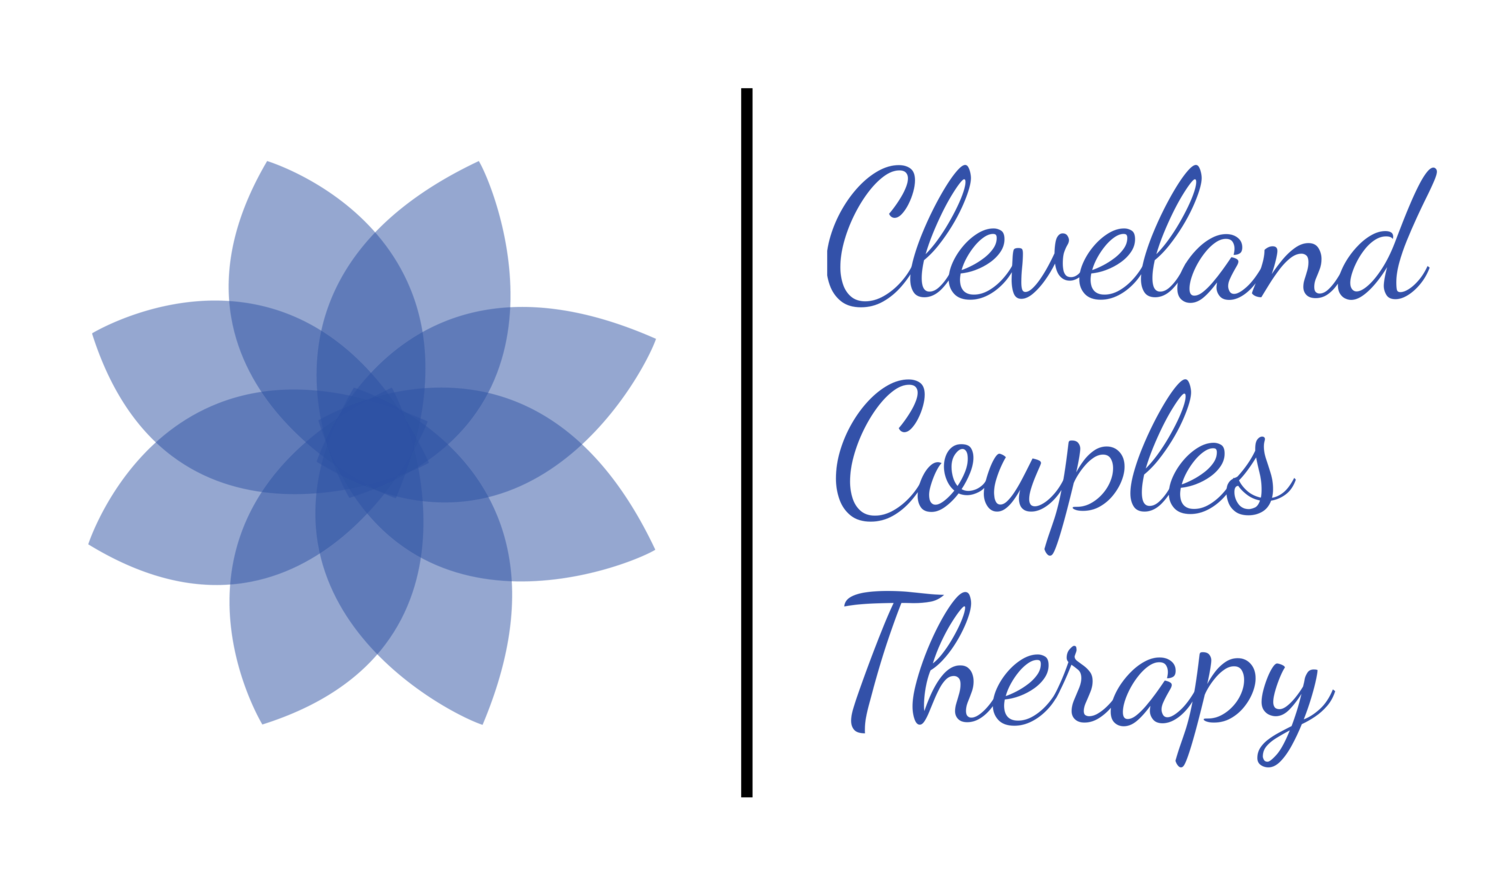 Cleveland Couples Therapy